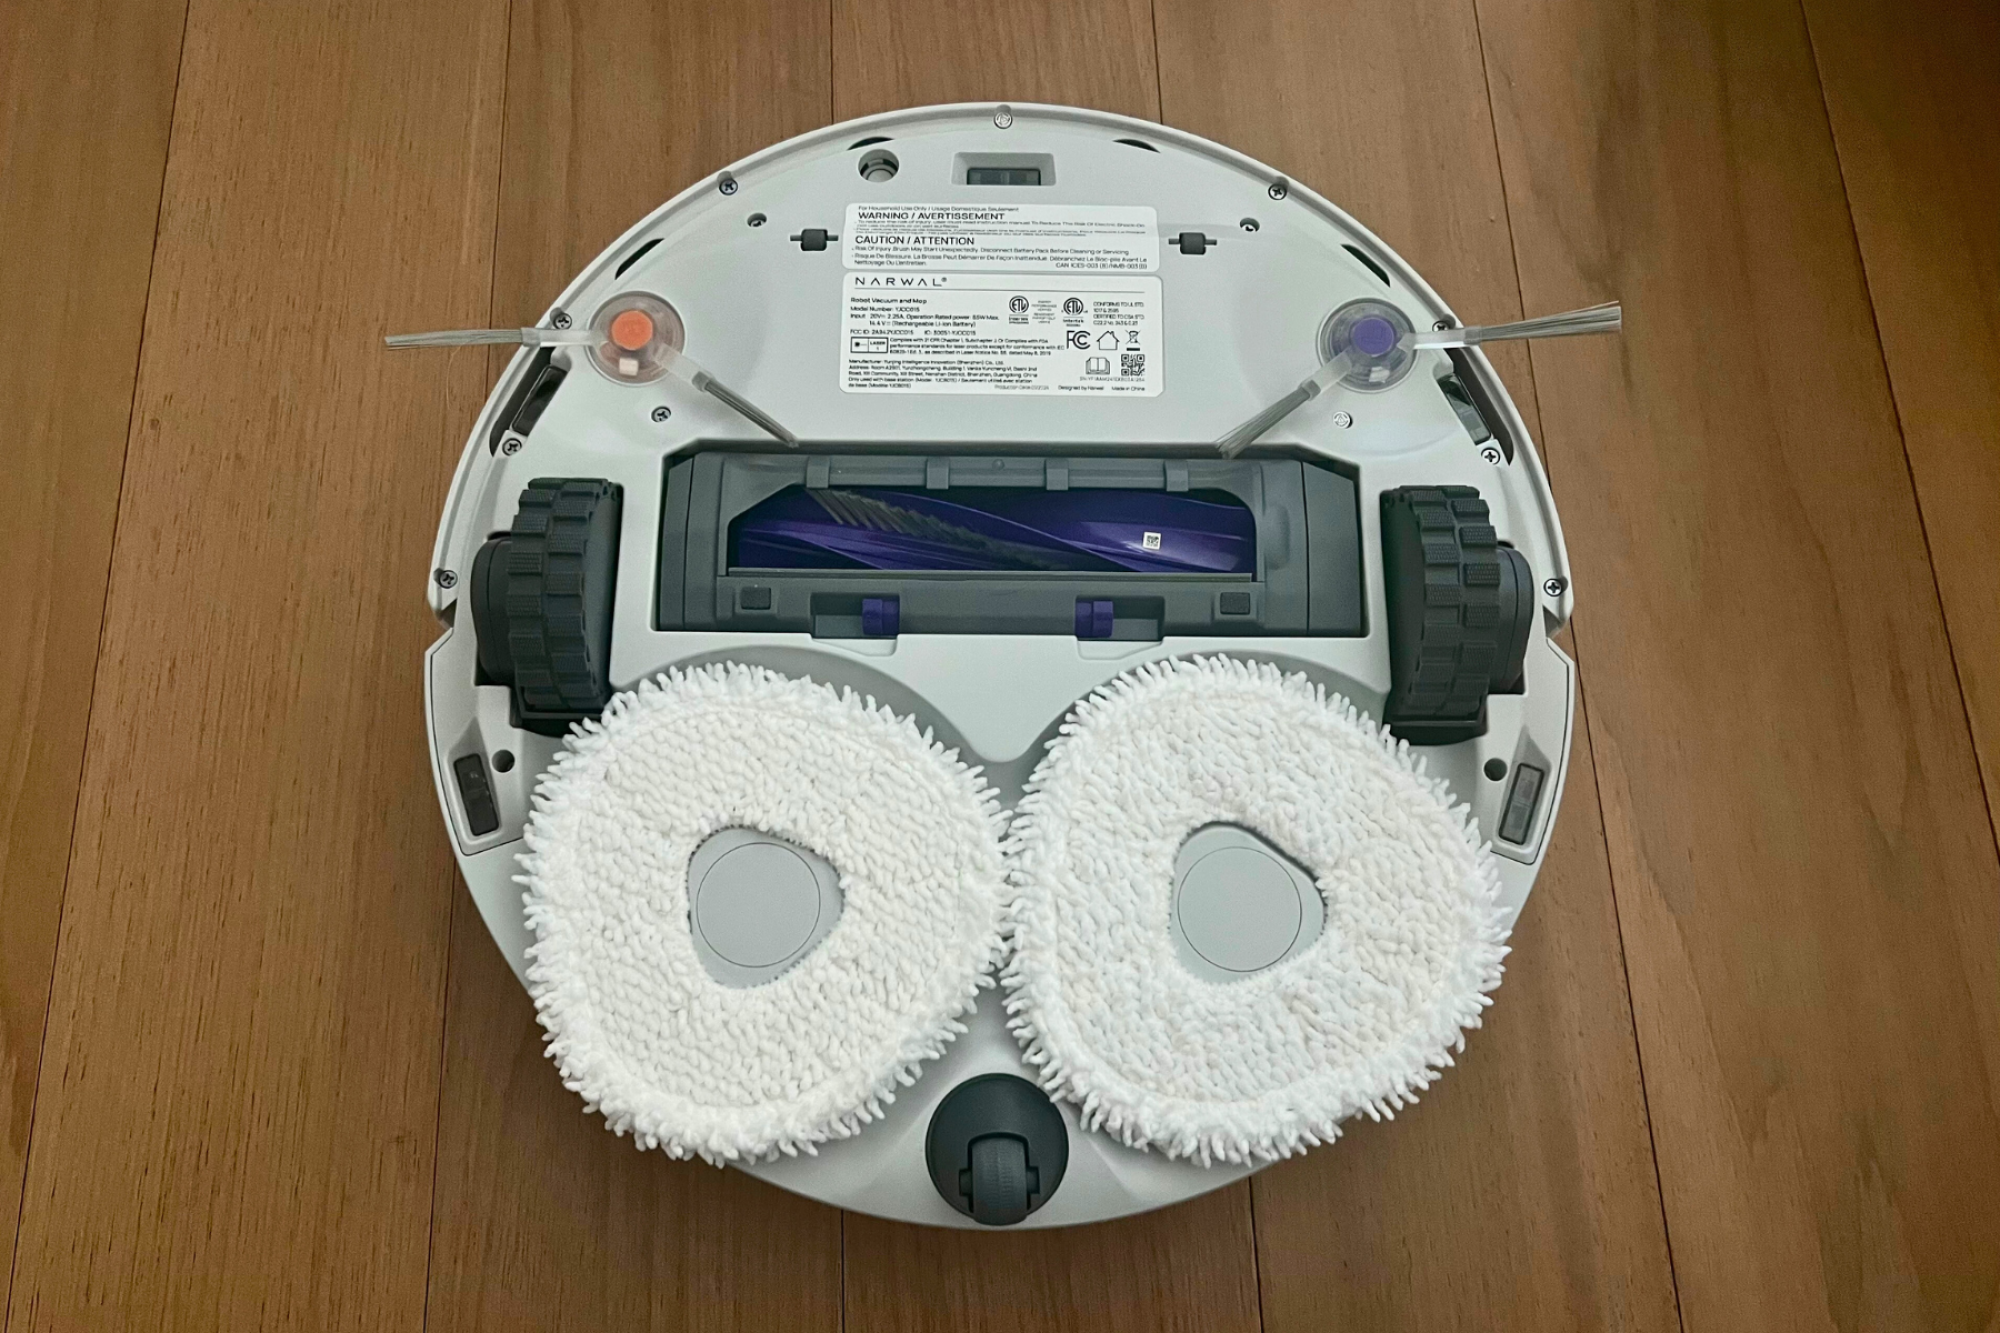 Underside of Narwal robot vacuum featuring two mopping pads and brushroll